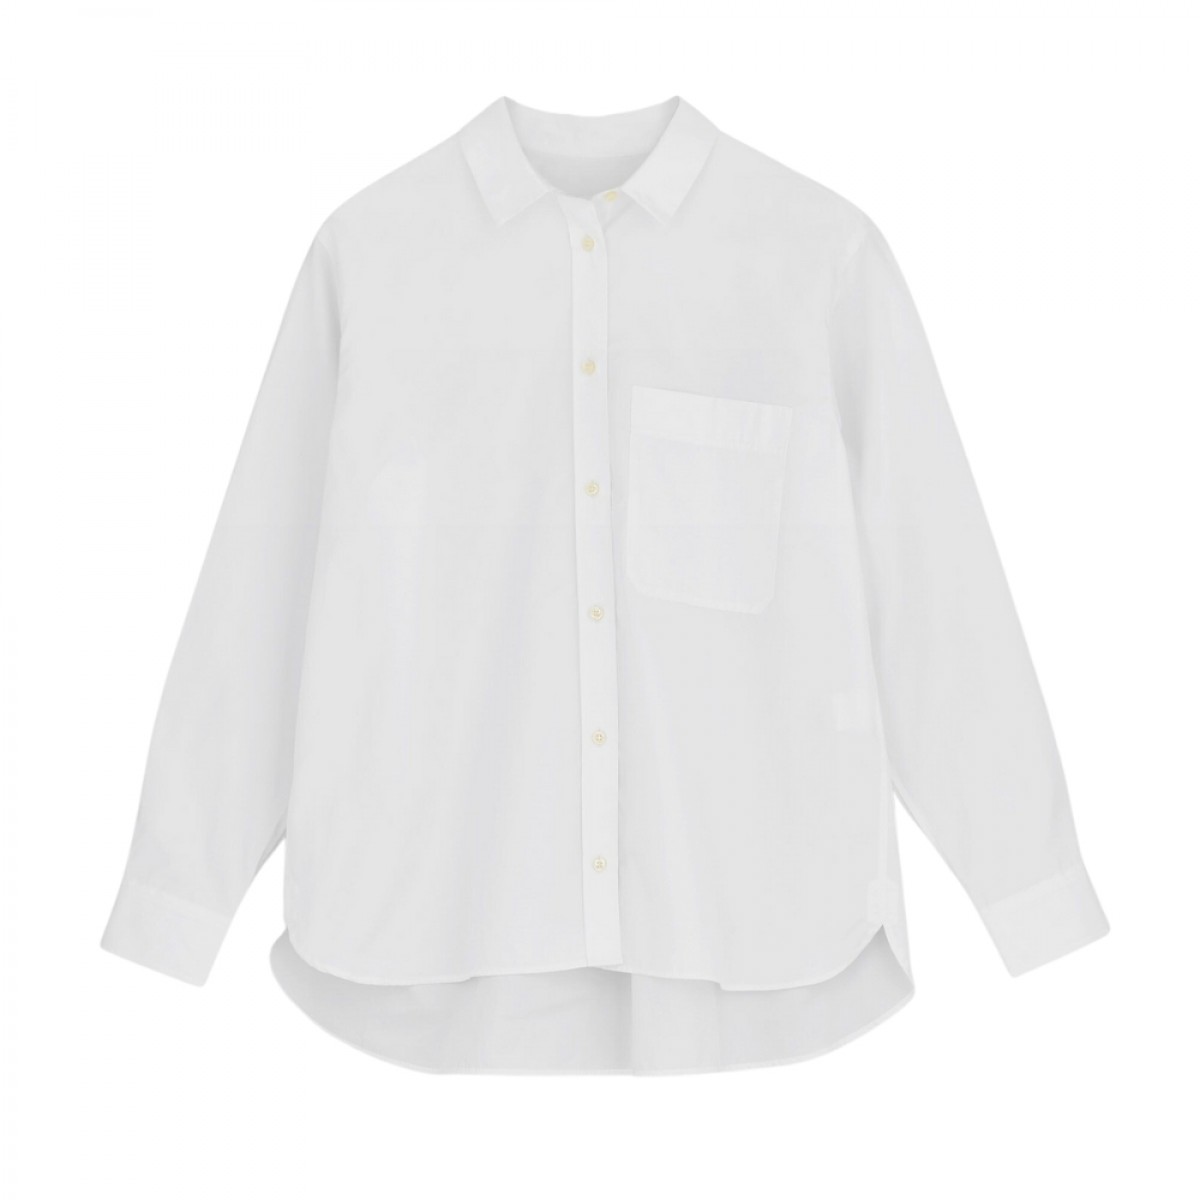 philo shirt tailored - white - front